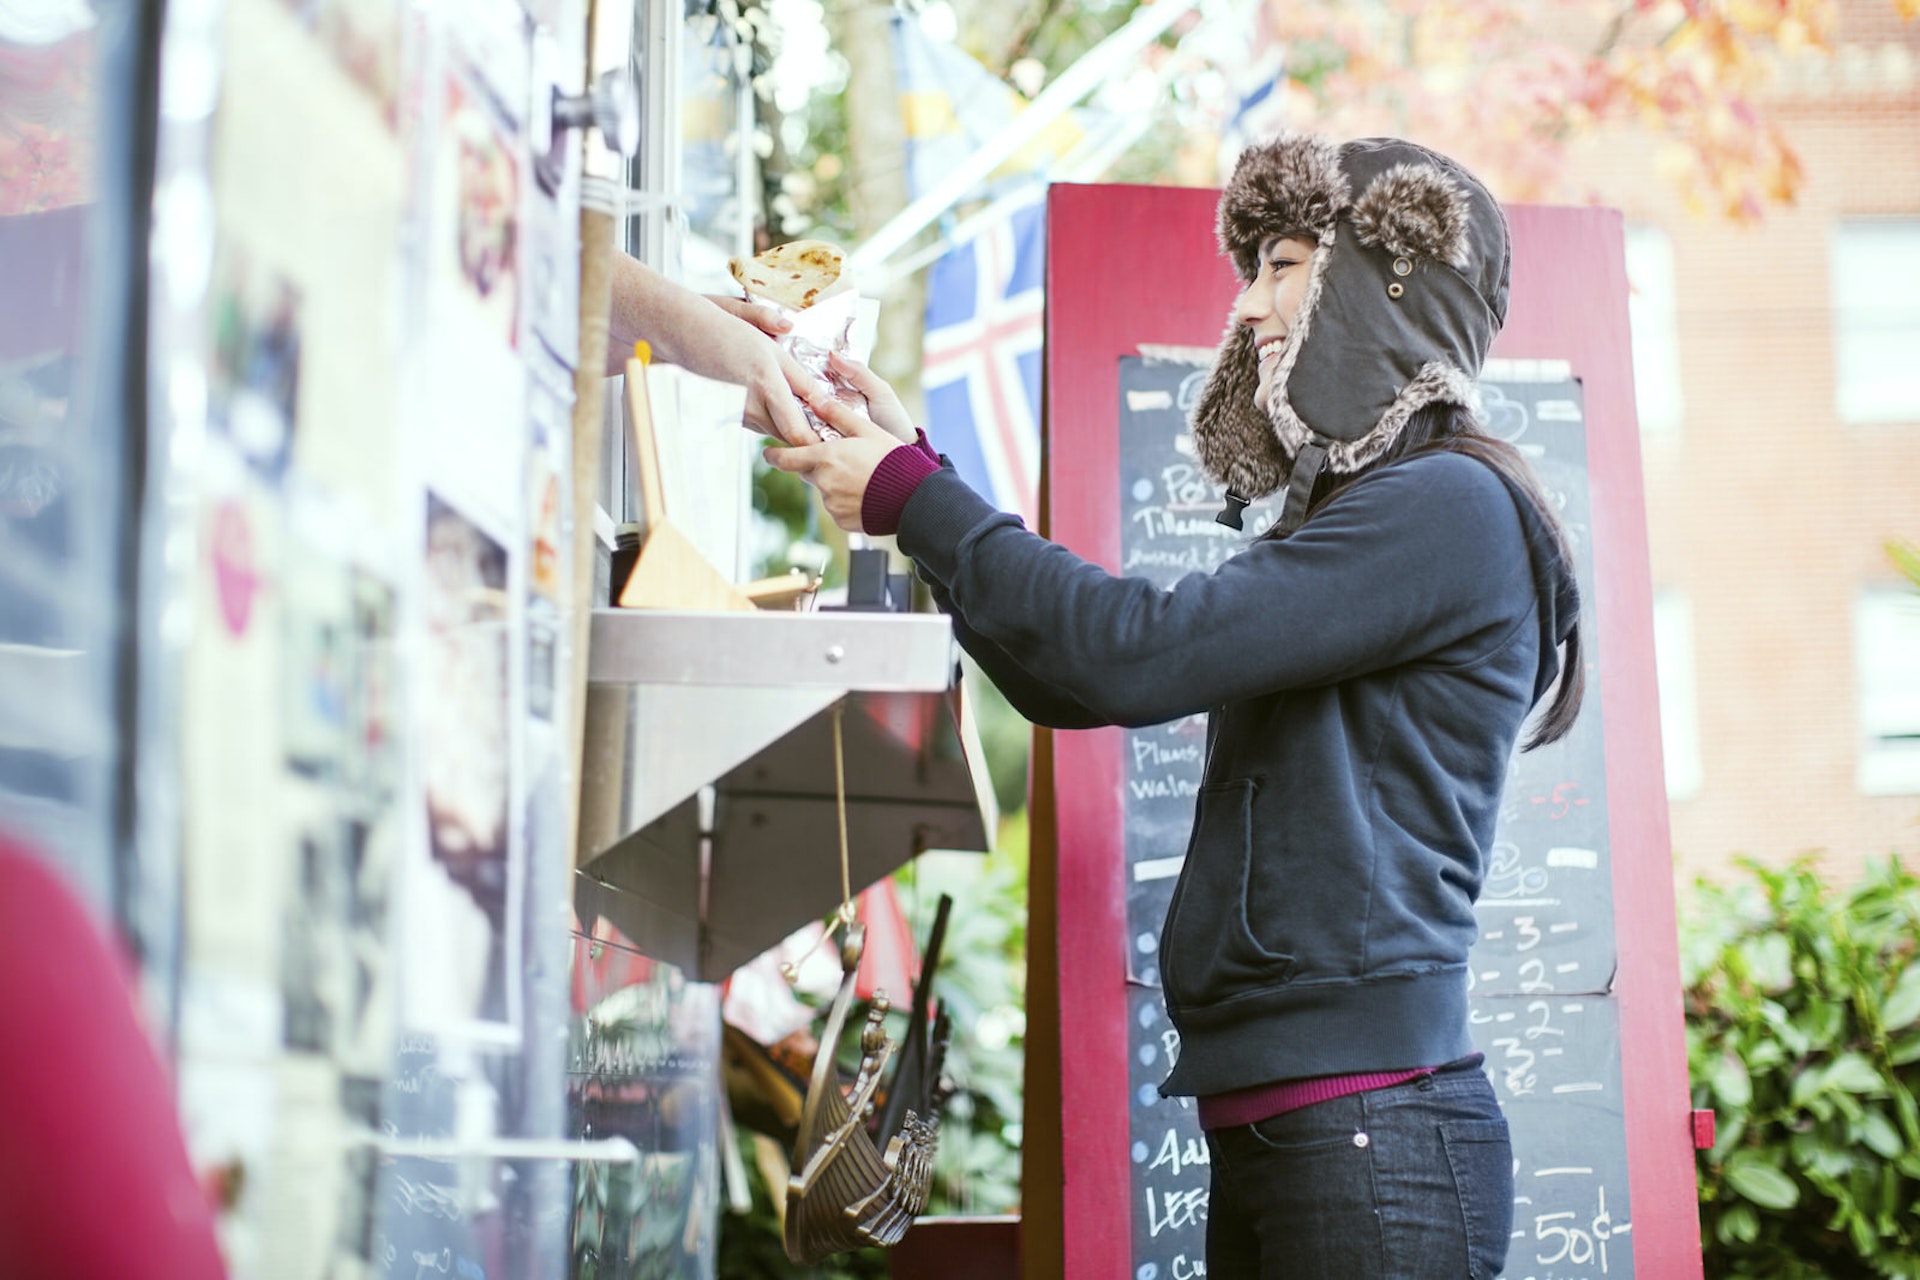 A young woman orders food from a food truck in Portland, Oregon.